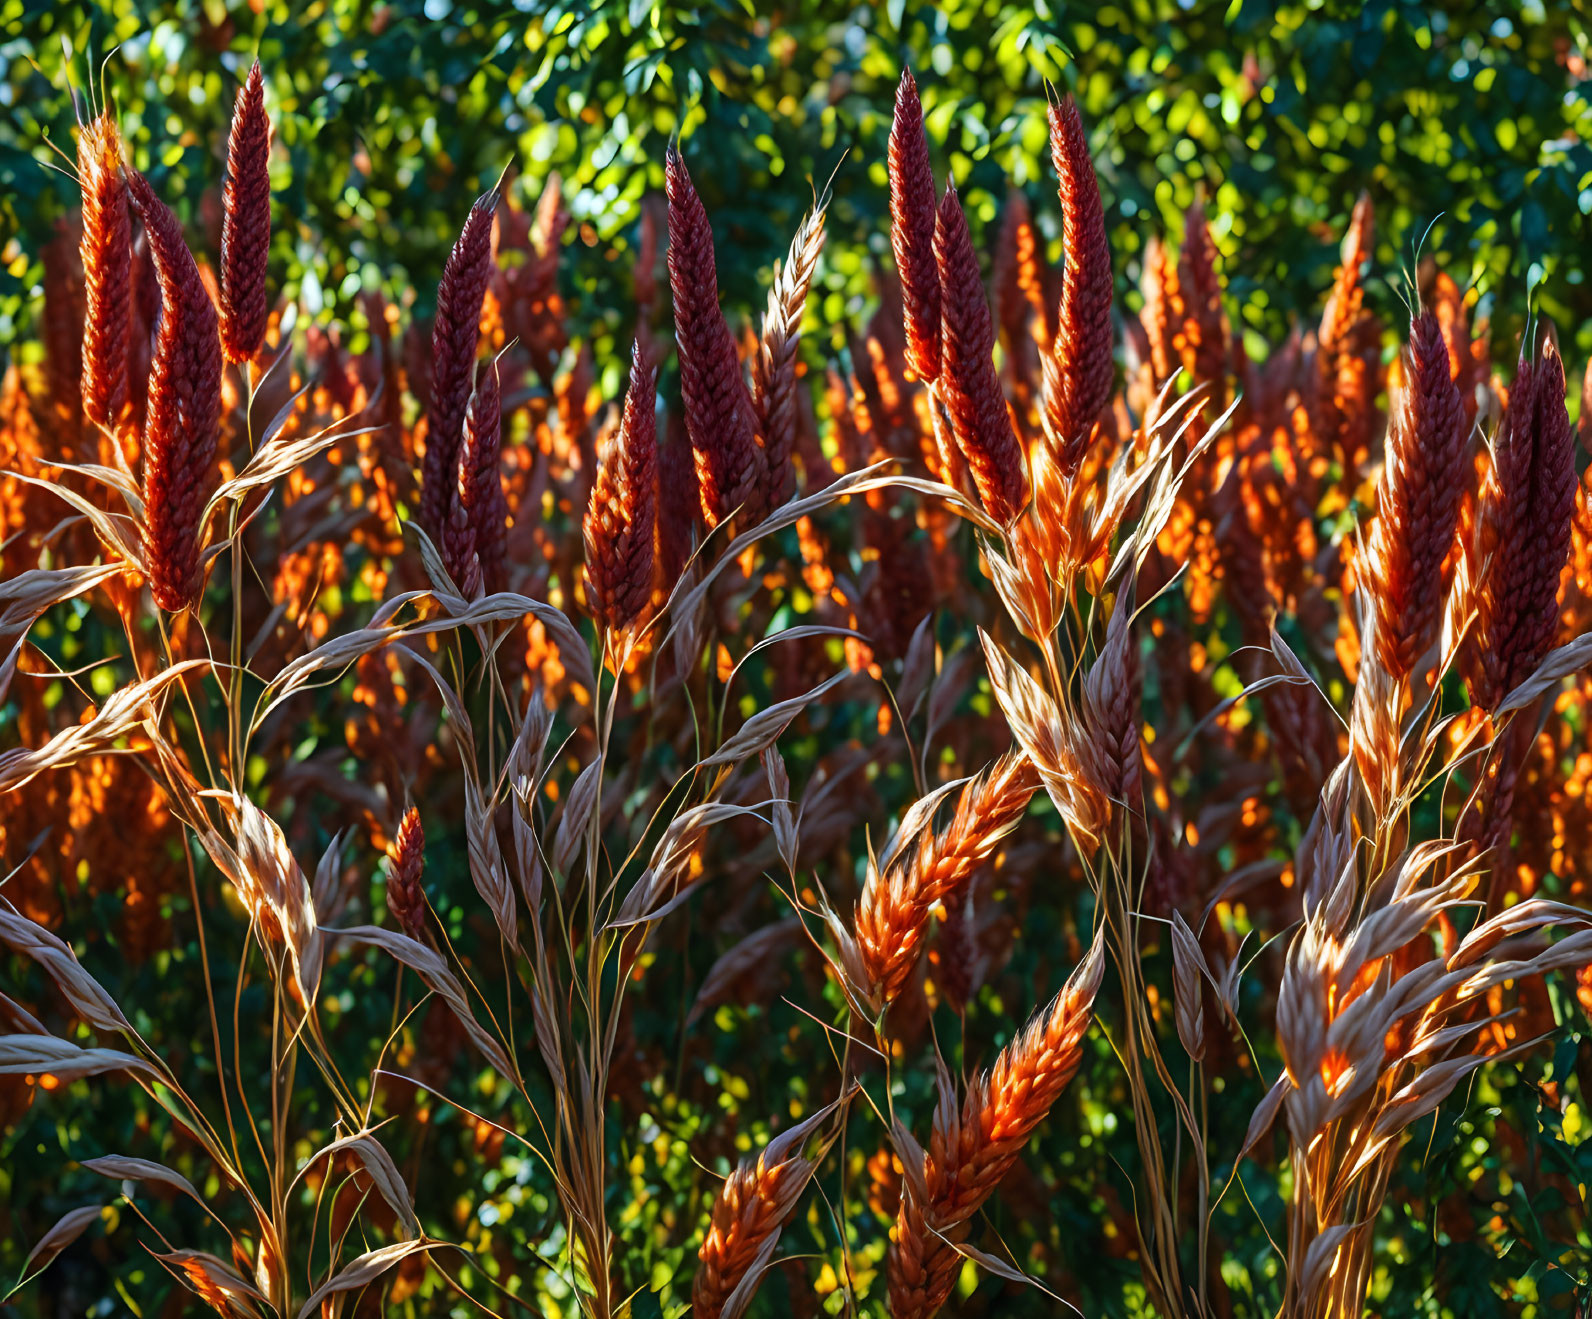 Long red wheat cones with orange leaves